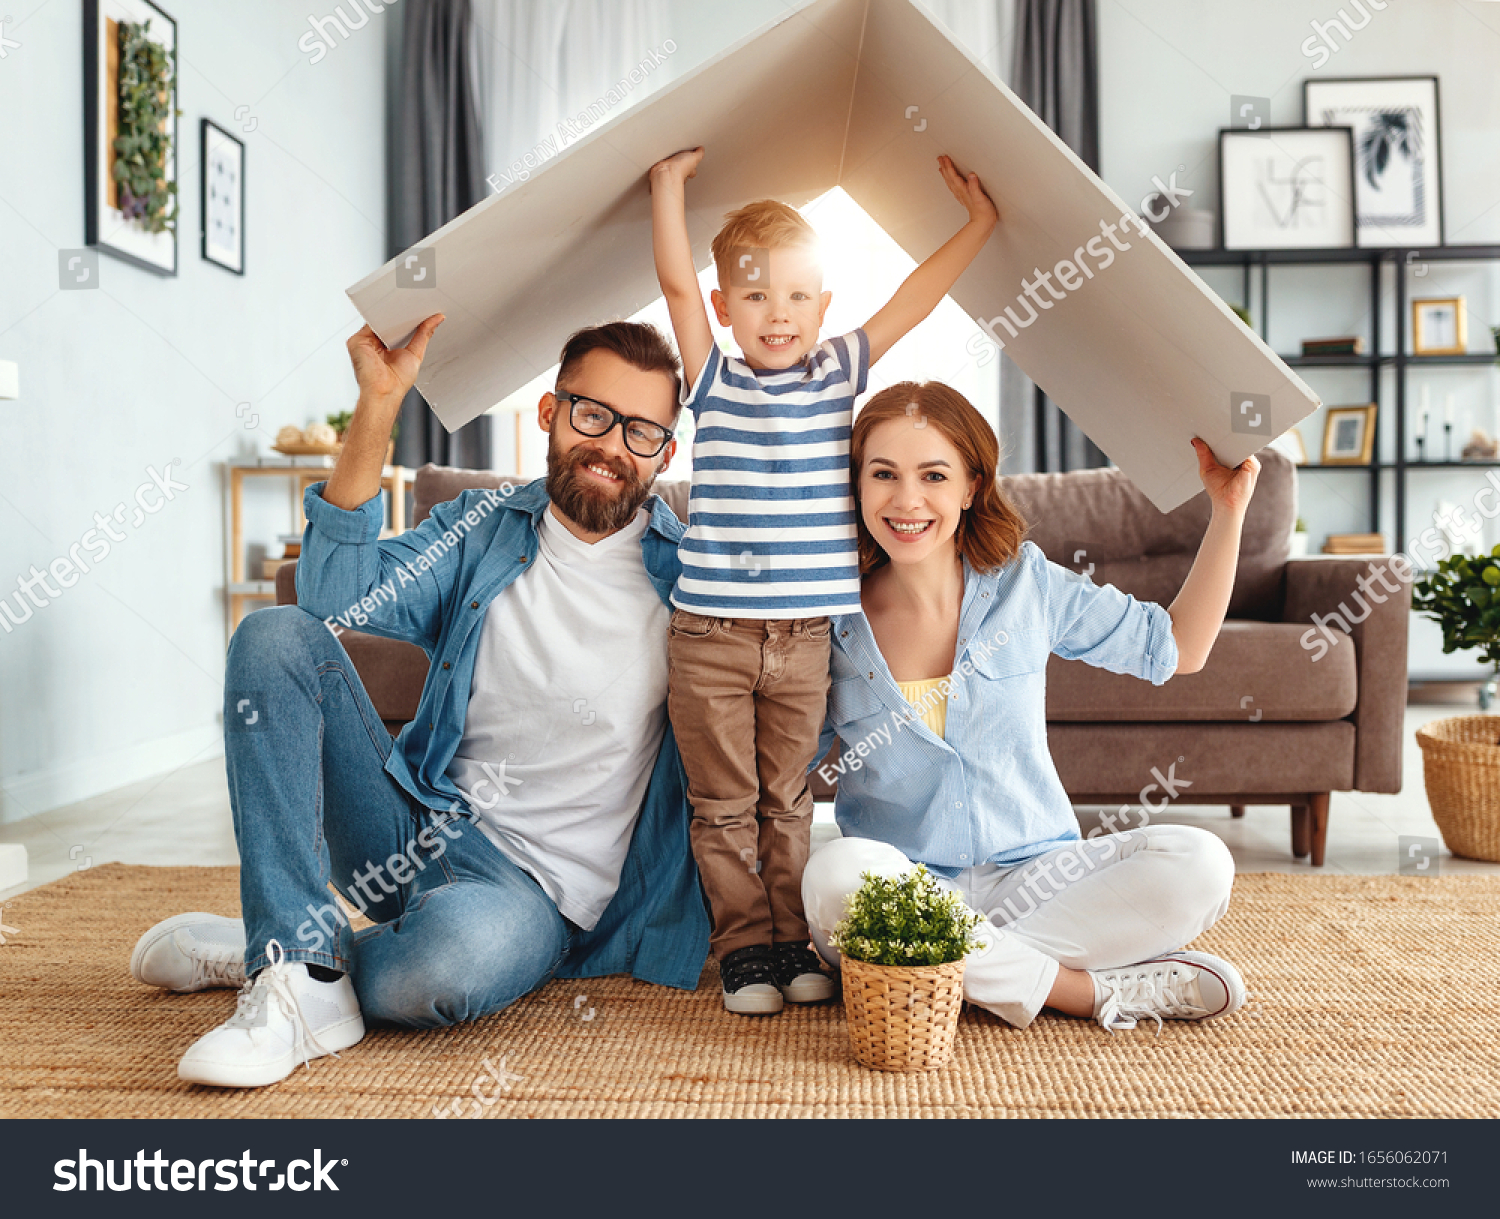 concept housing a young family. Mother father and child in new house with a roof at a home
 #1656062071